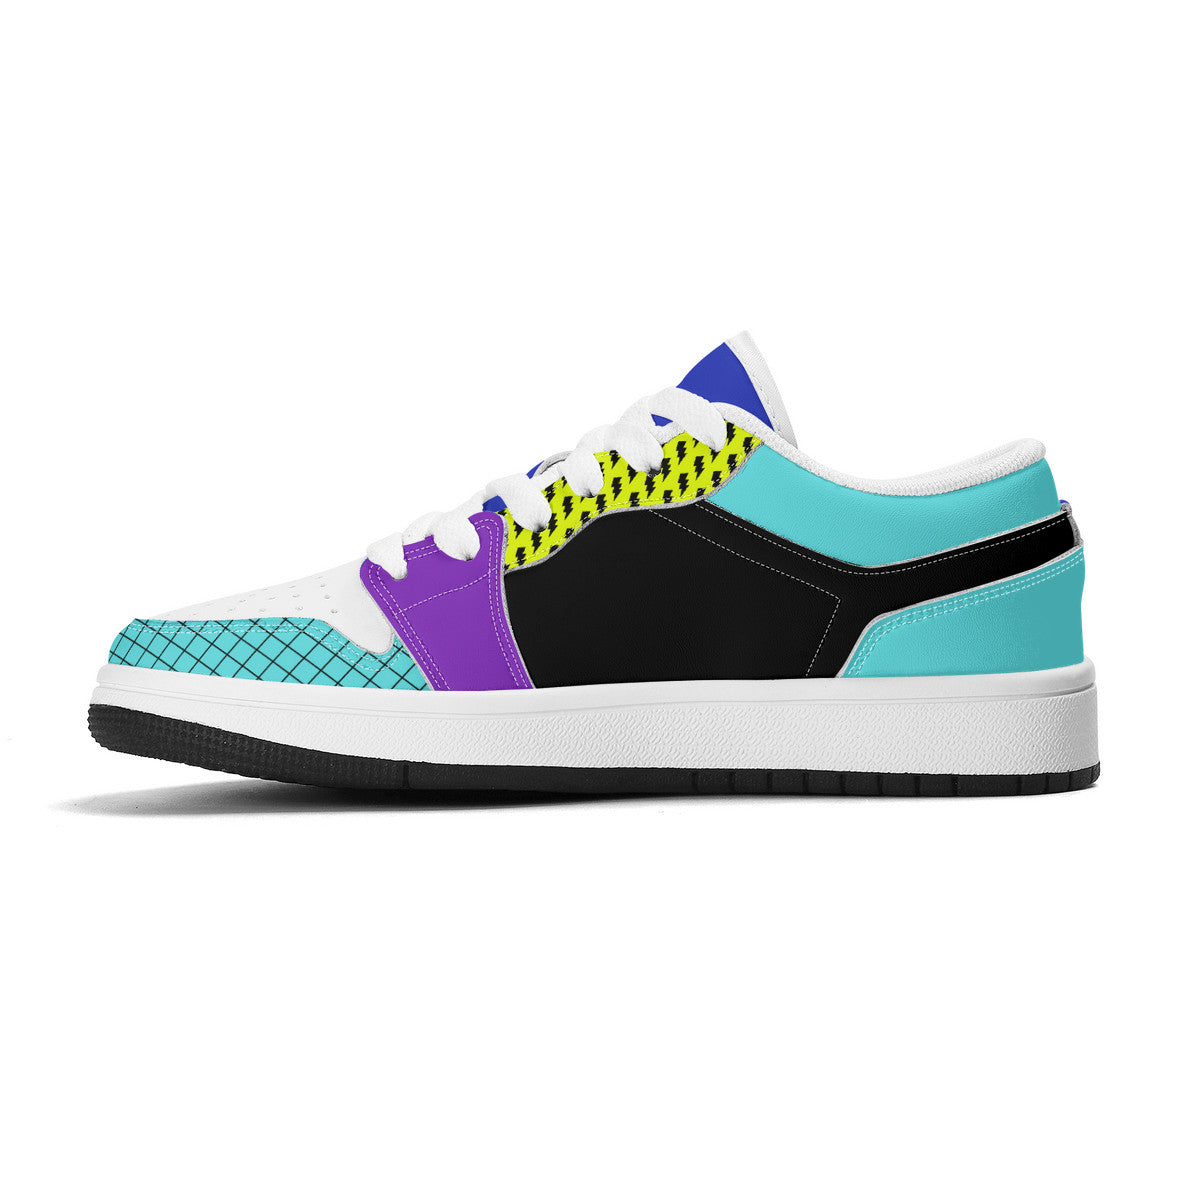 Personalize Your Own Kids Low-Top PU Leather Sneakers-Retro Neons